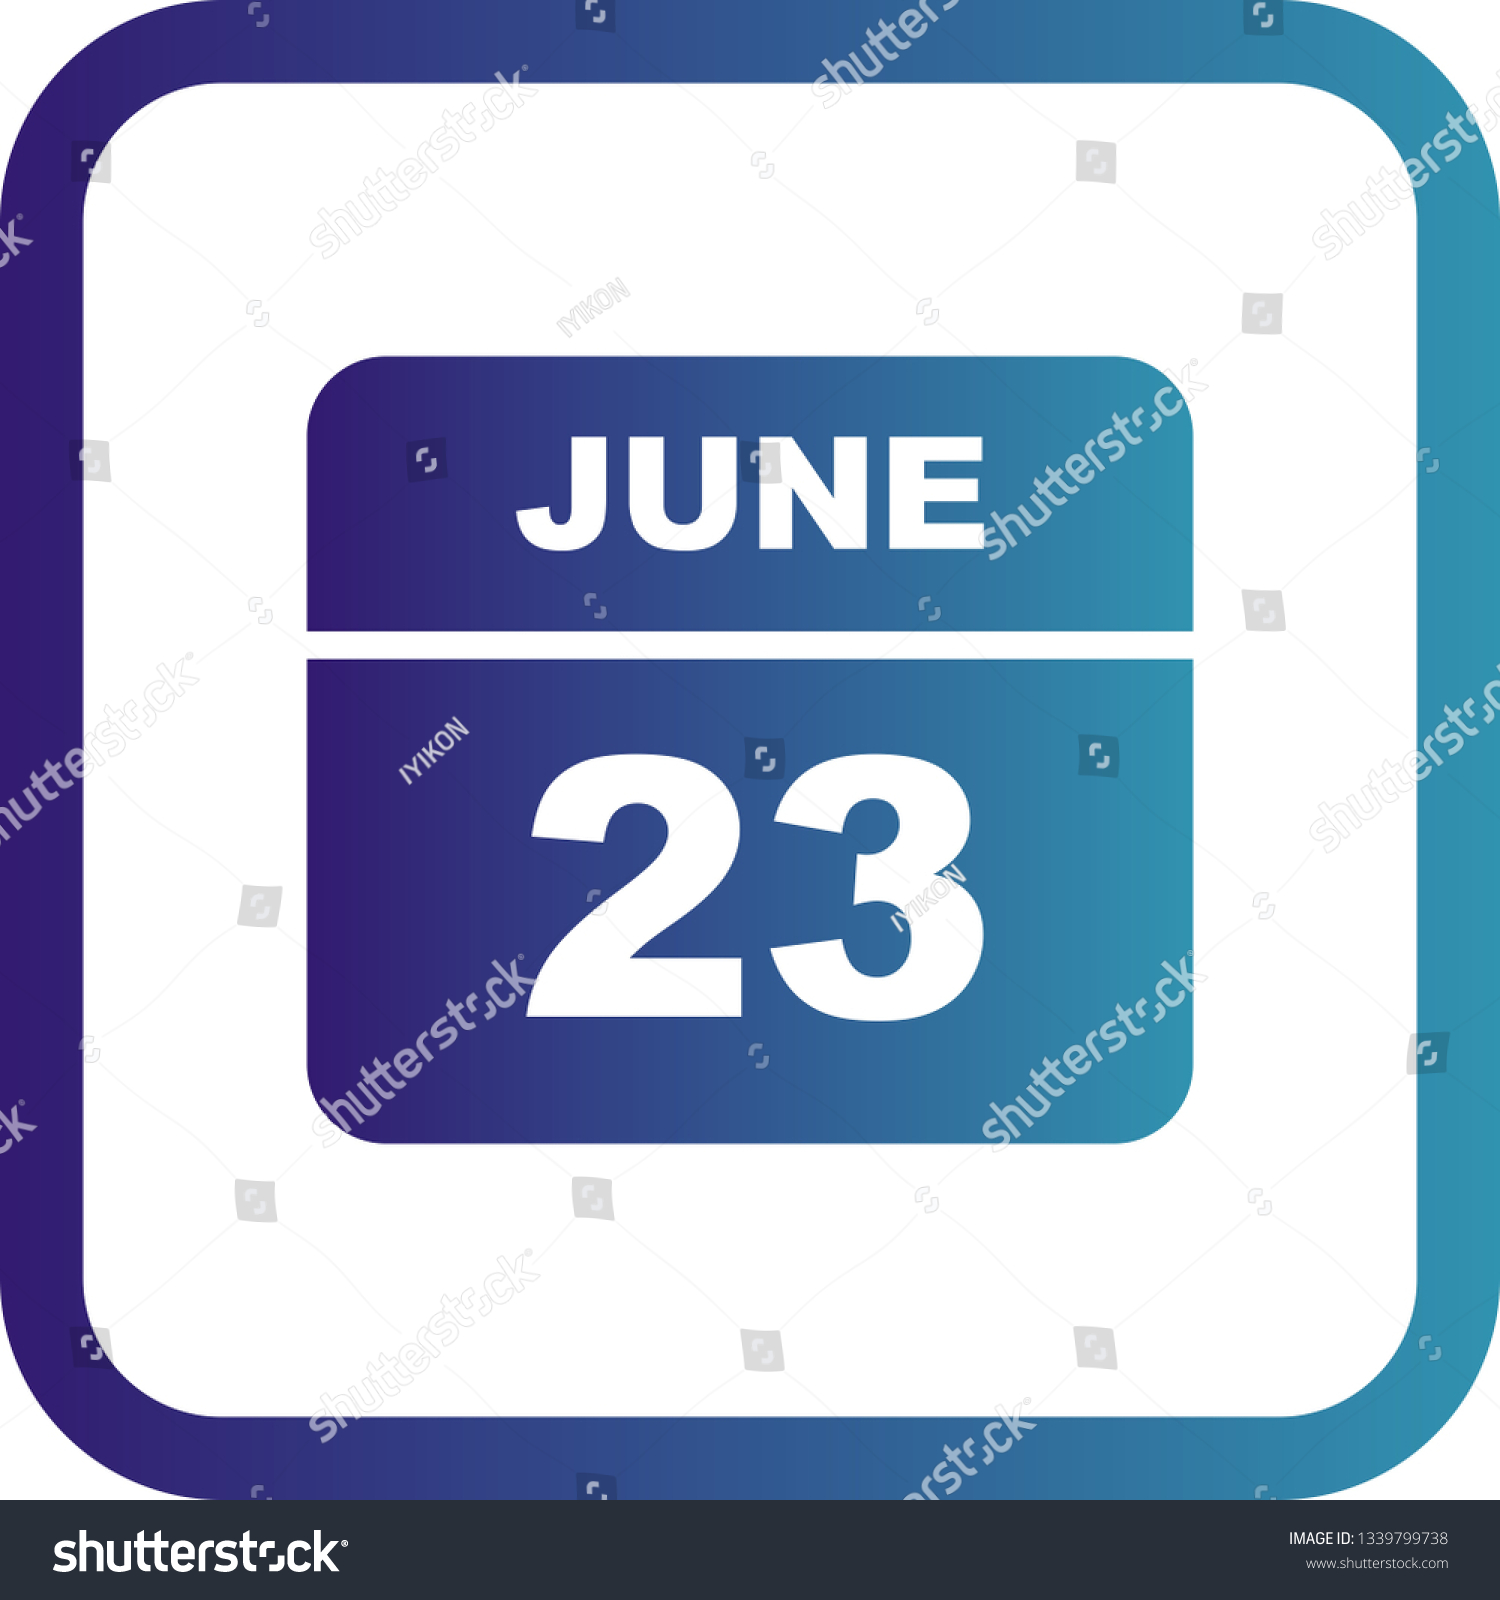 June 23rd Date on a Single Day Calendar Royalty Free Stock Photo